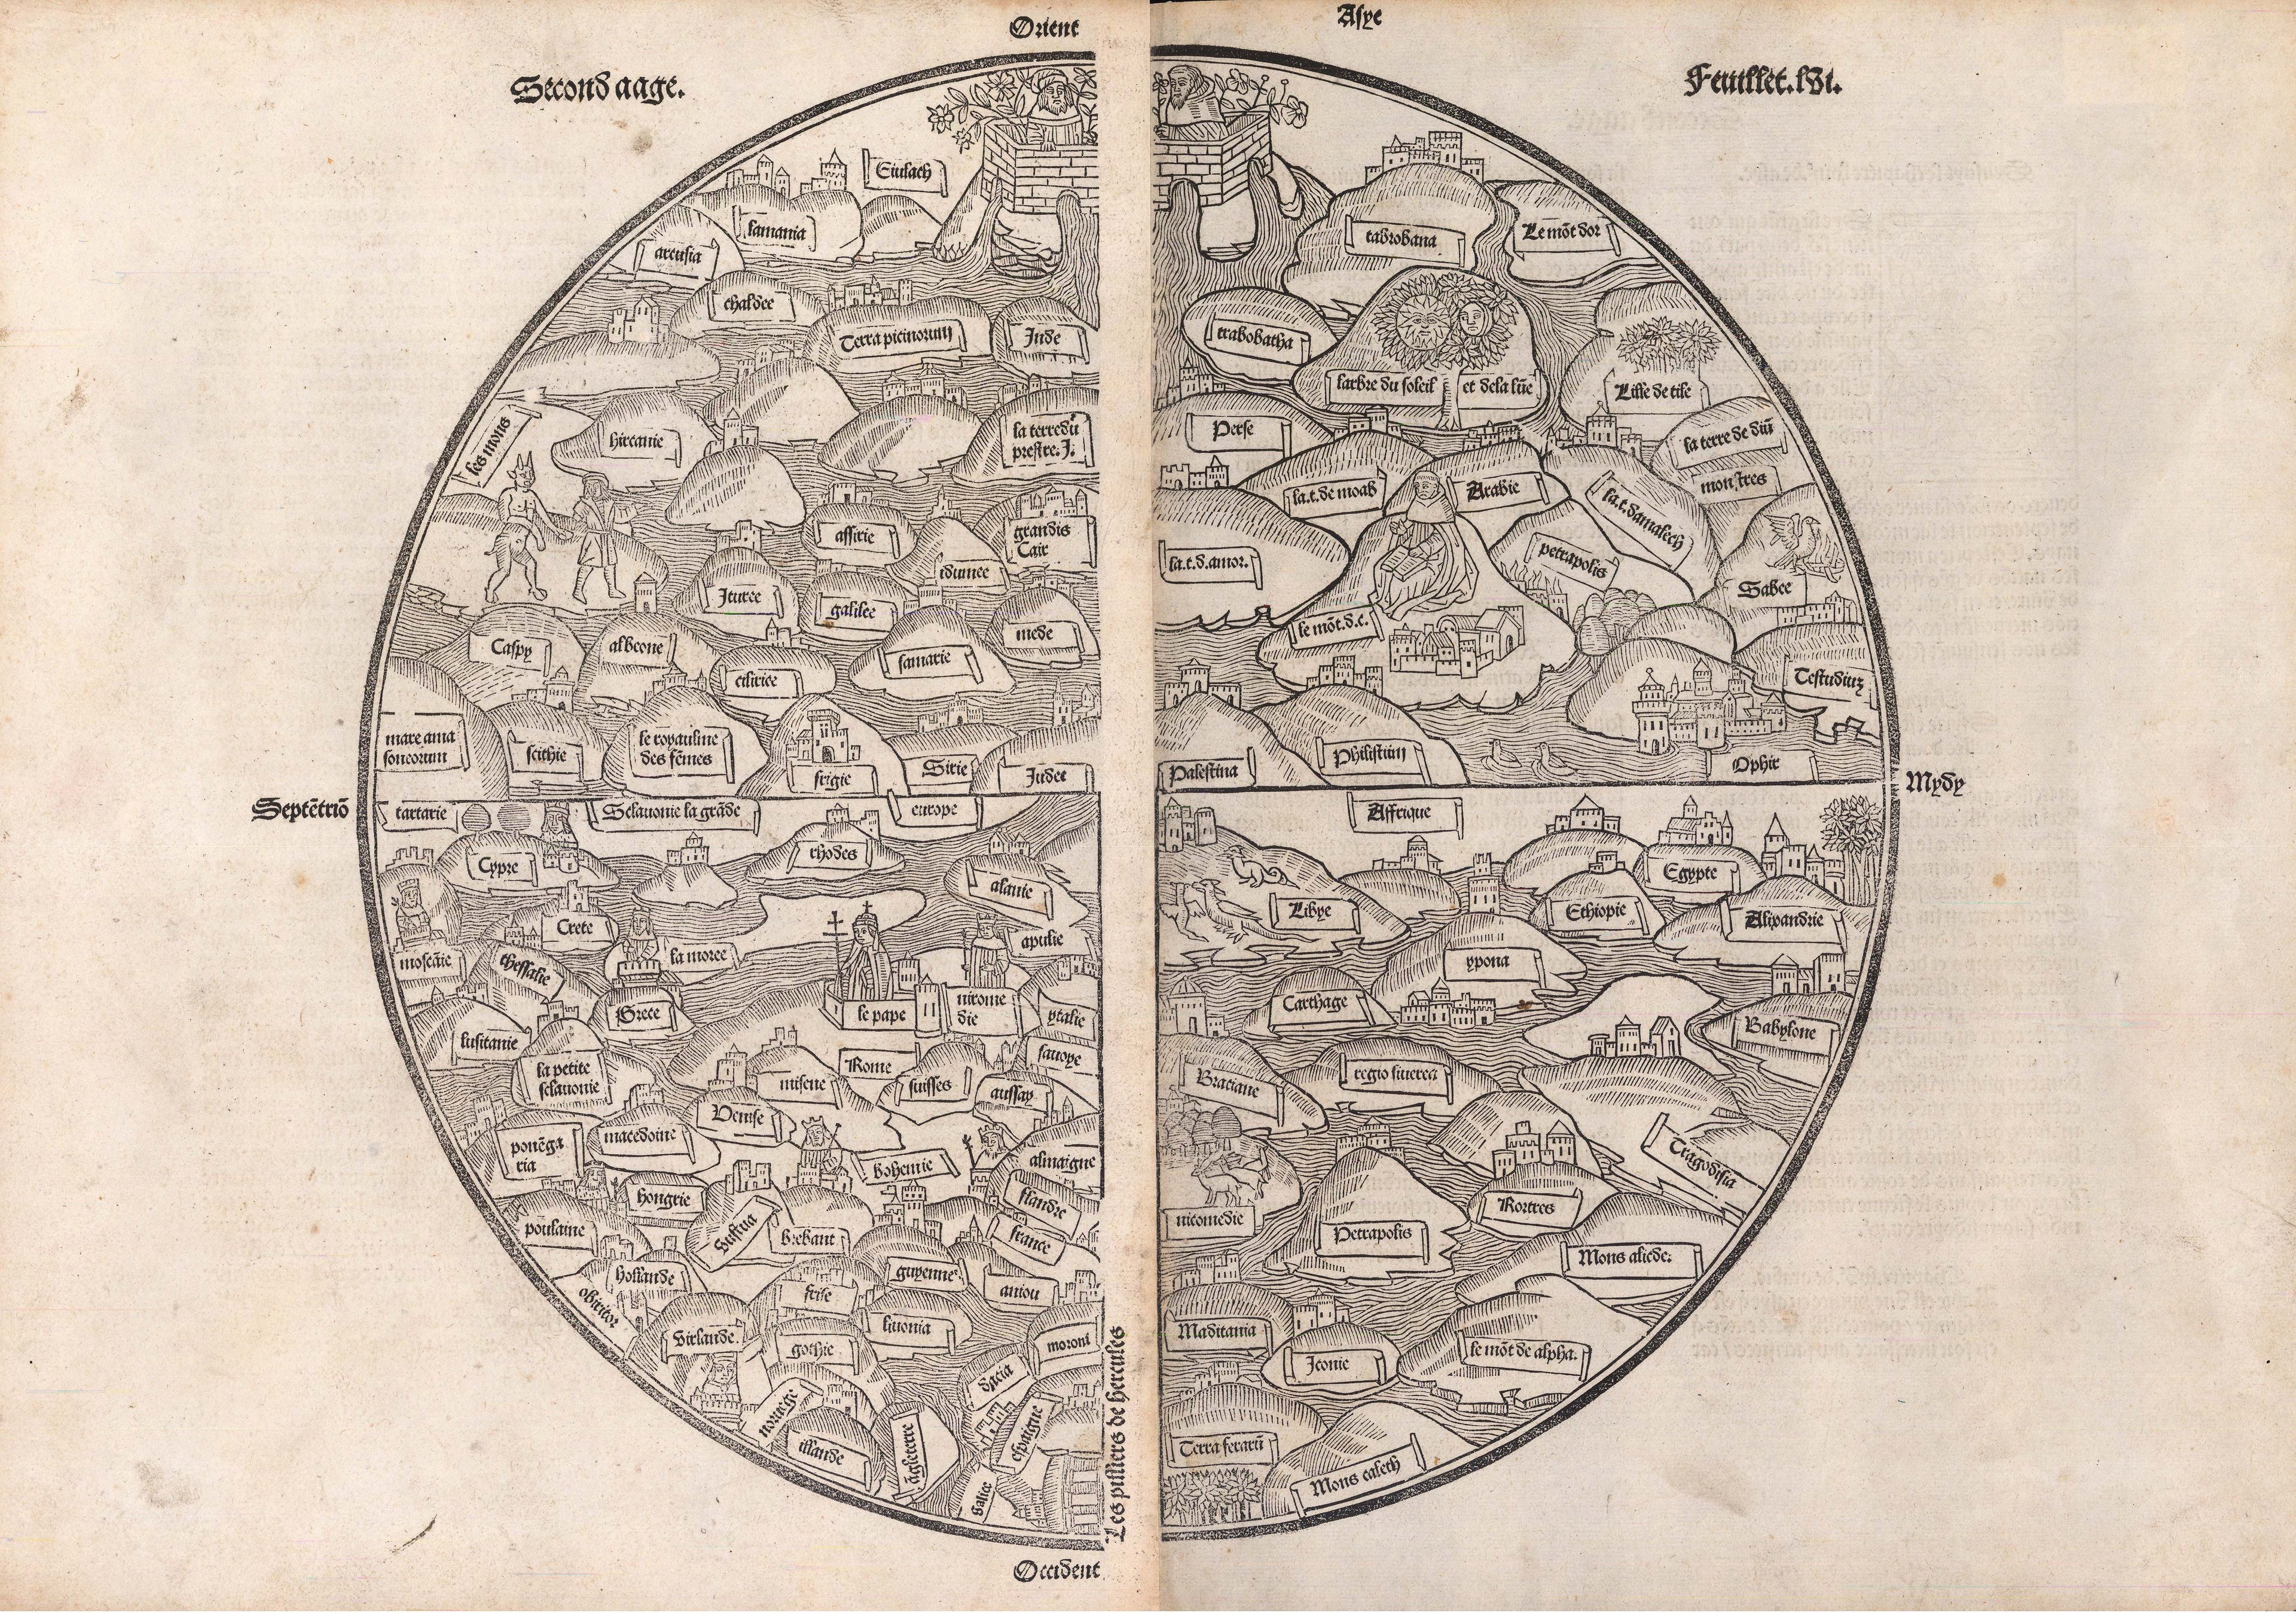 Black and white woodcut of the world in a modified mappa mundi form, from the Mer des Hystoires (Sea of Stories). The map is round. The top half shows Asia, with Paradise at the very top in the East. The lower left quadrant shows Europe, and the right lower quadrant shows Africa. Place names are show in small labels throughout the map.